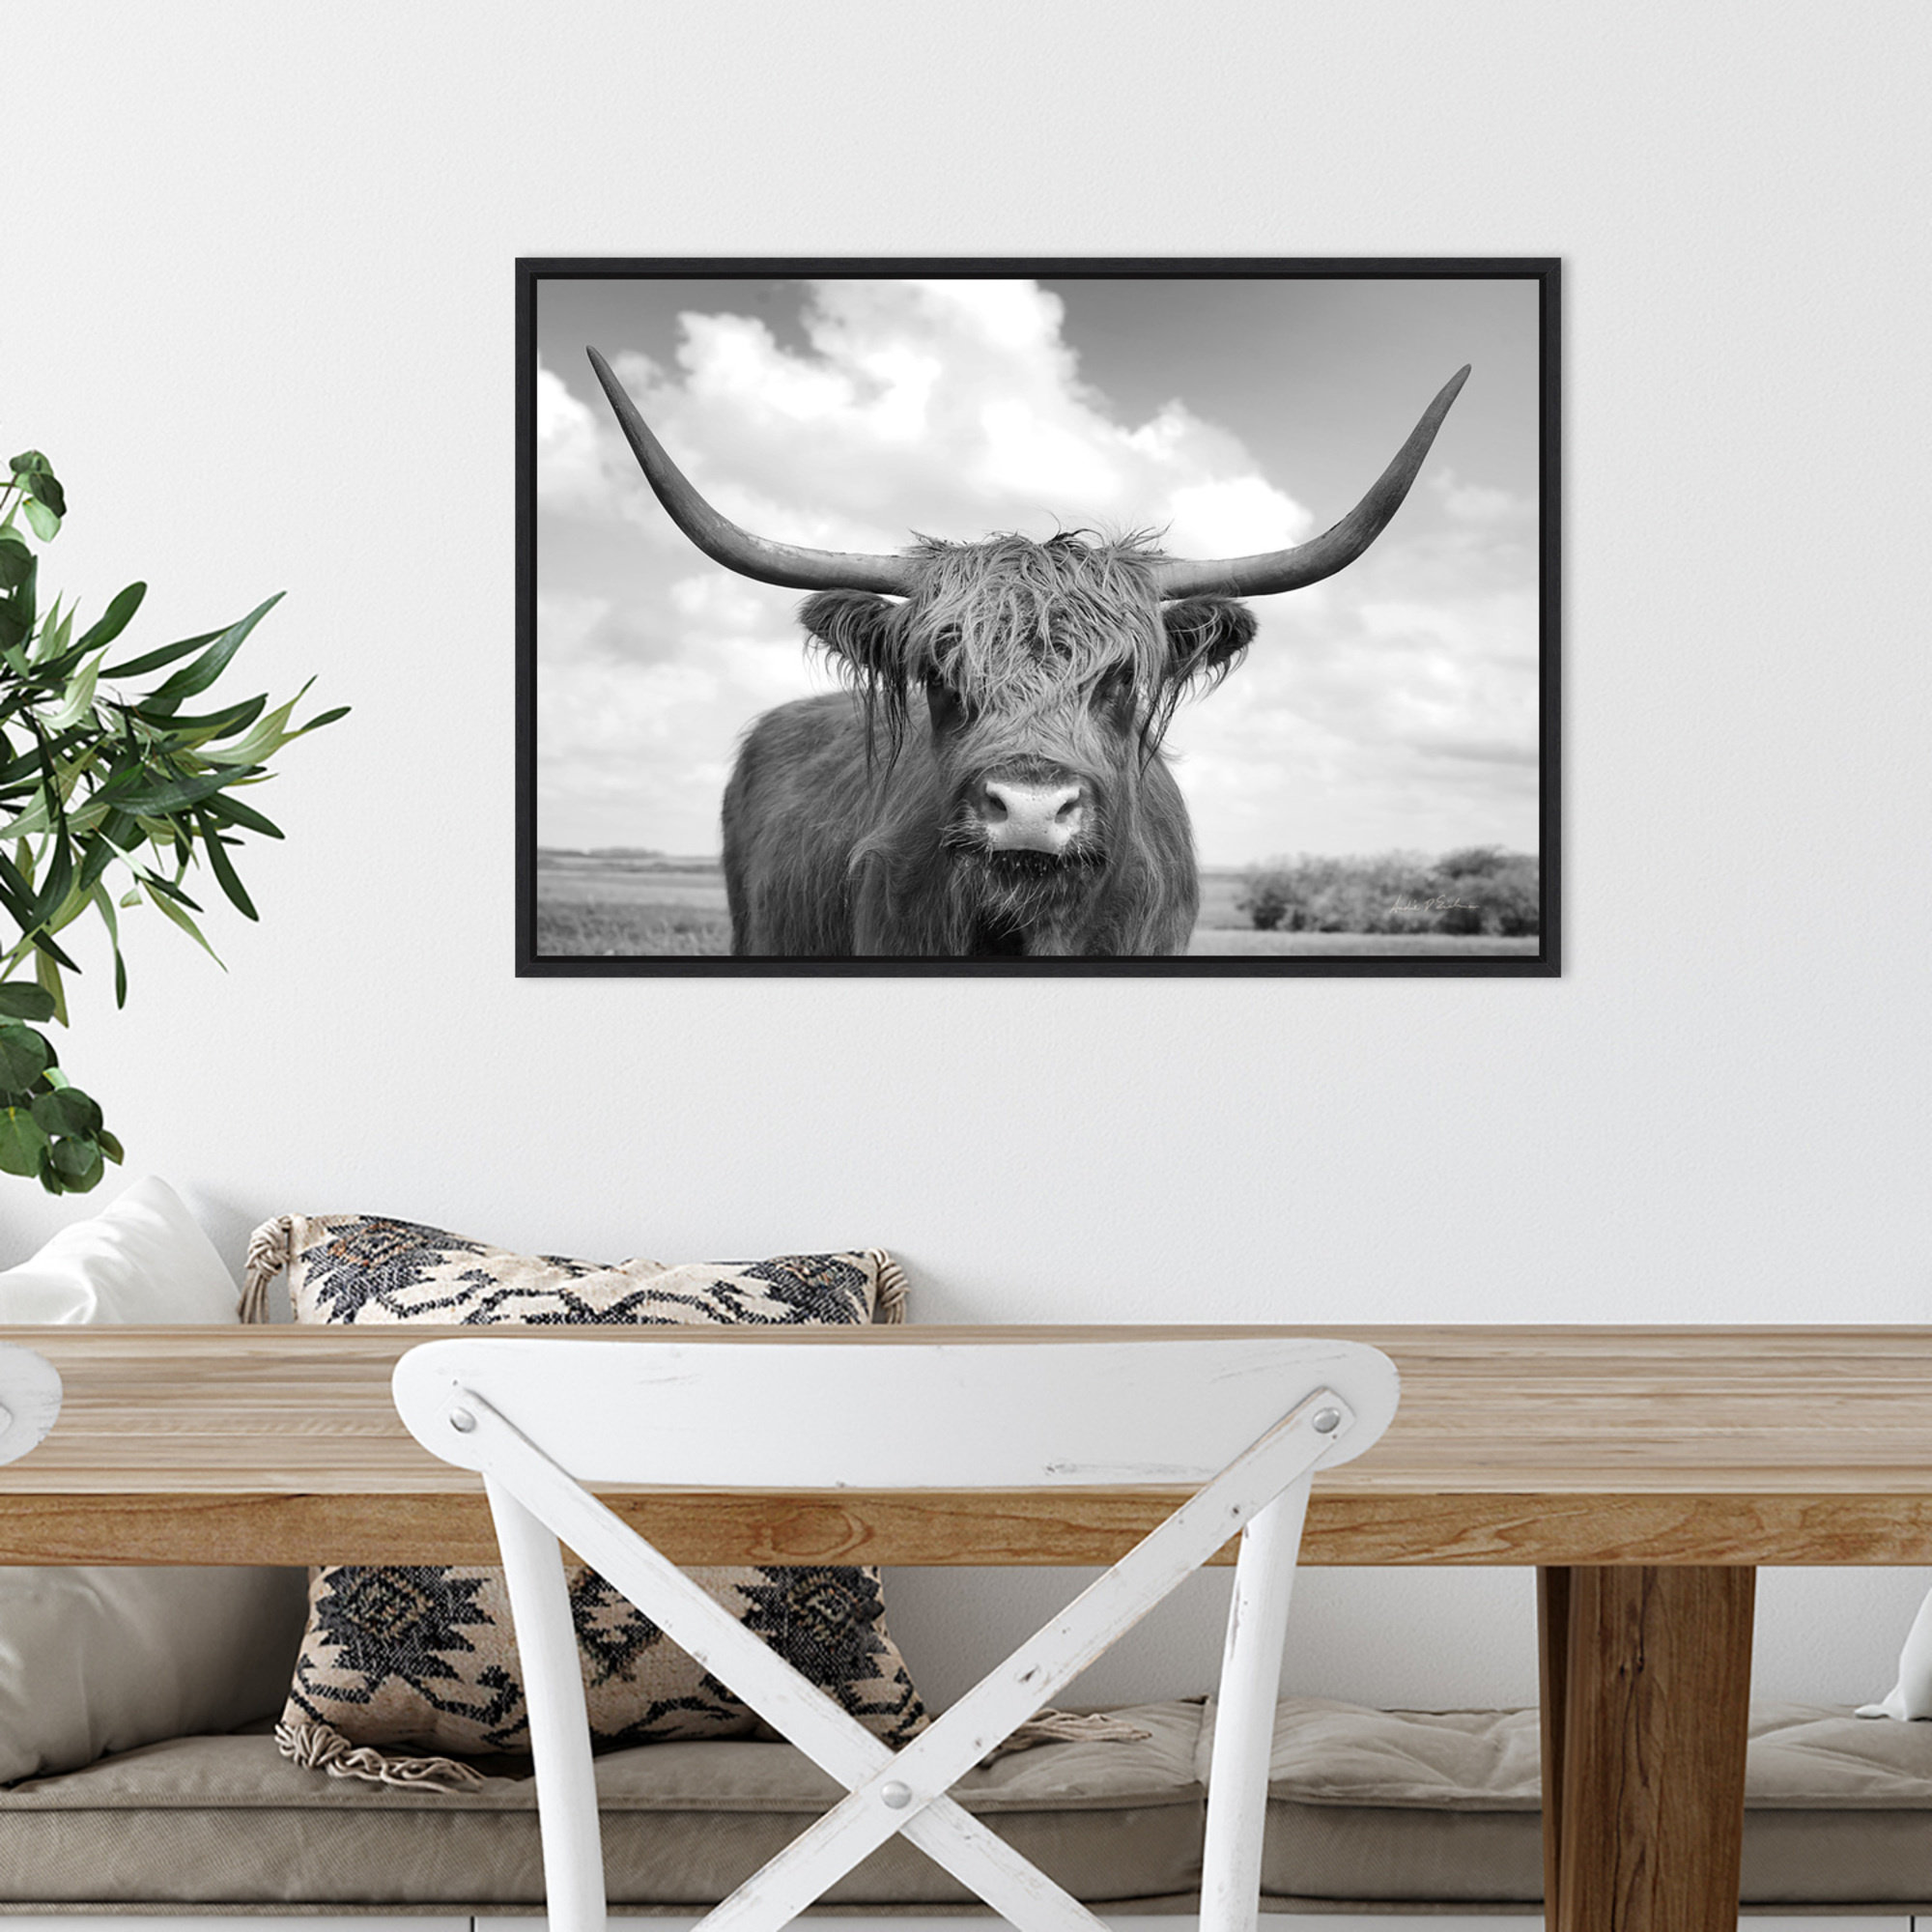 Union Rustic Andre Eichman Highland Cow On The Ranch Framed On Canvas ...